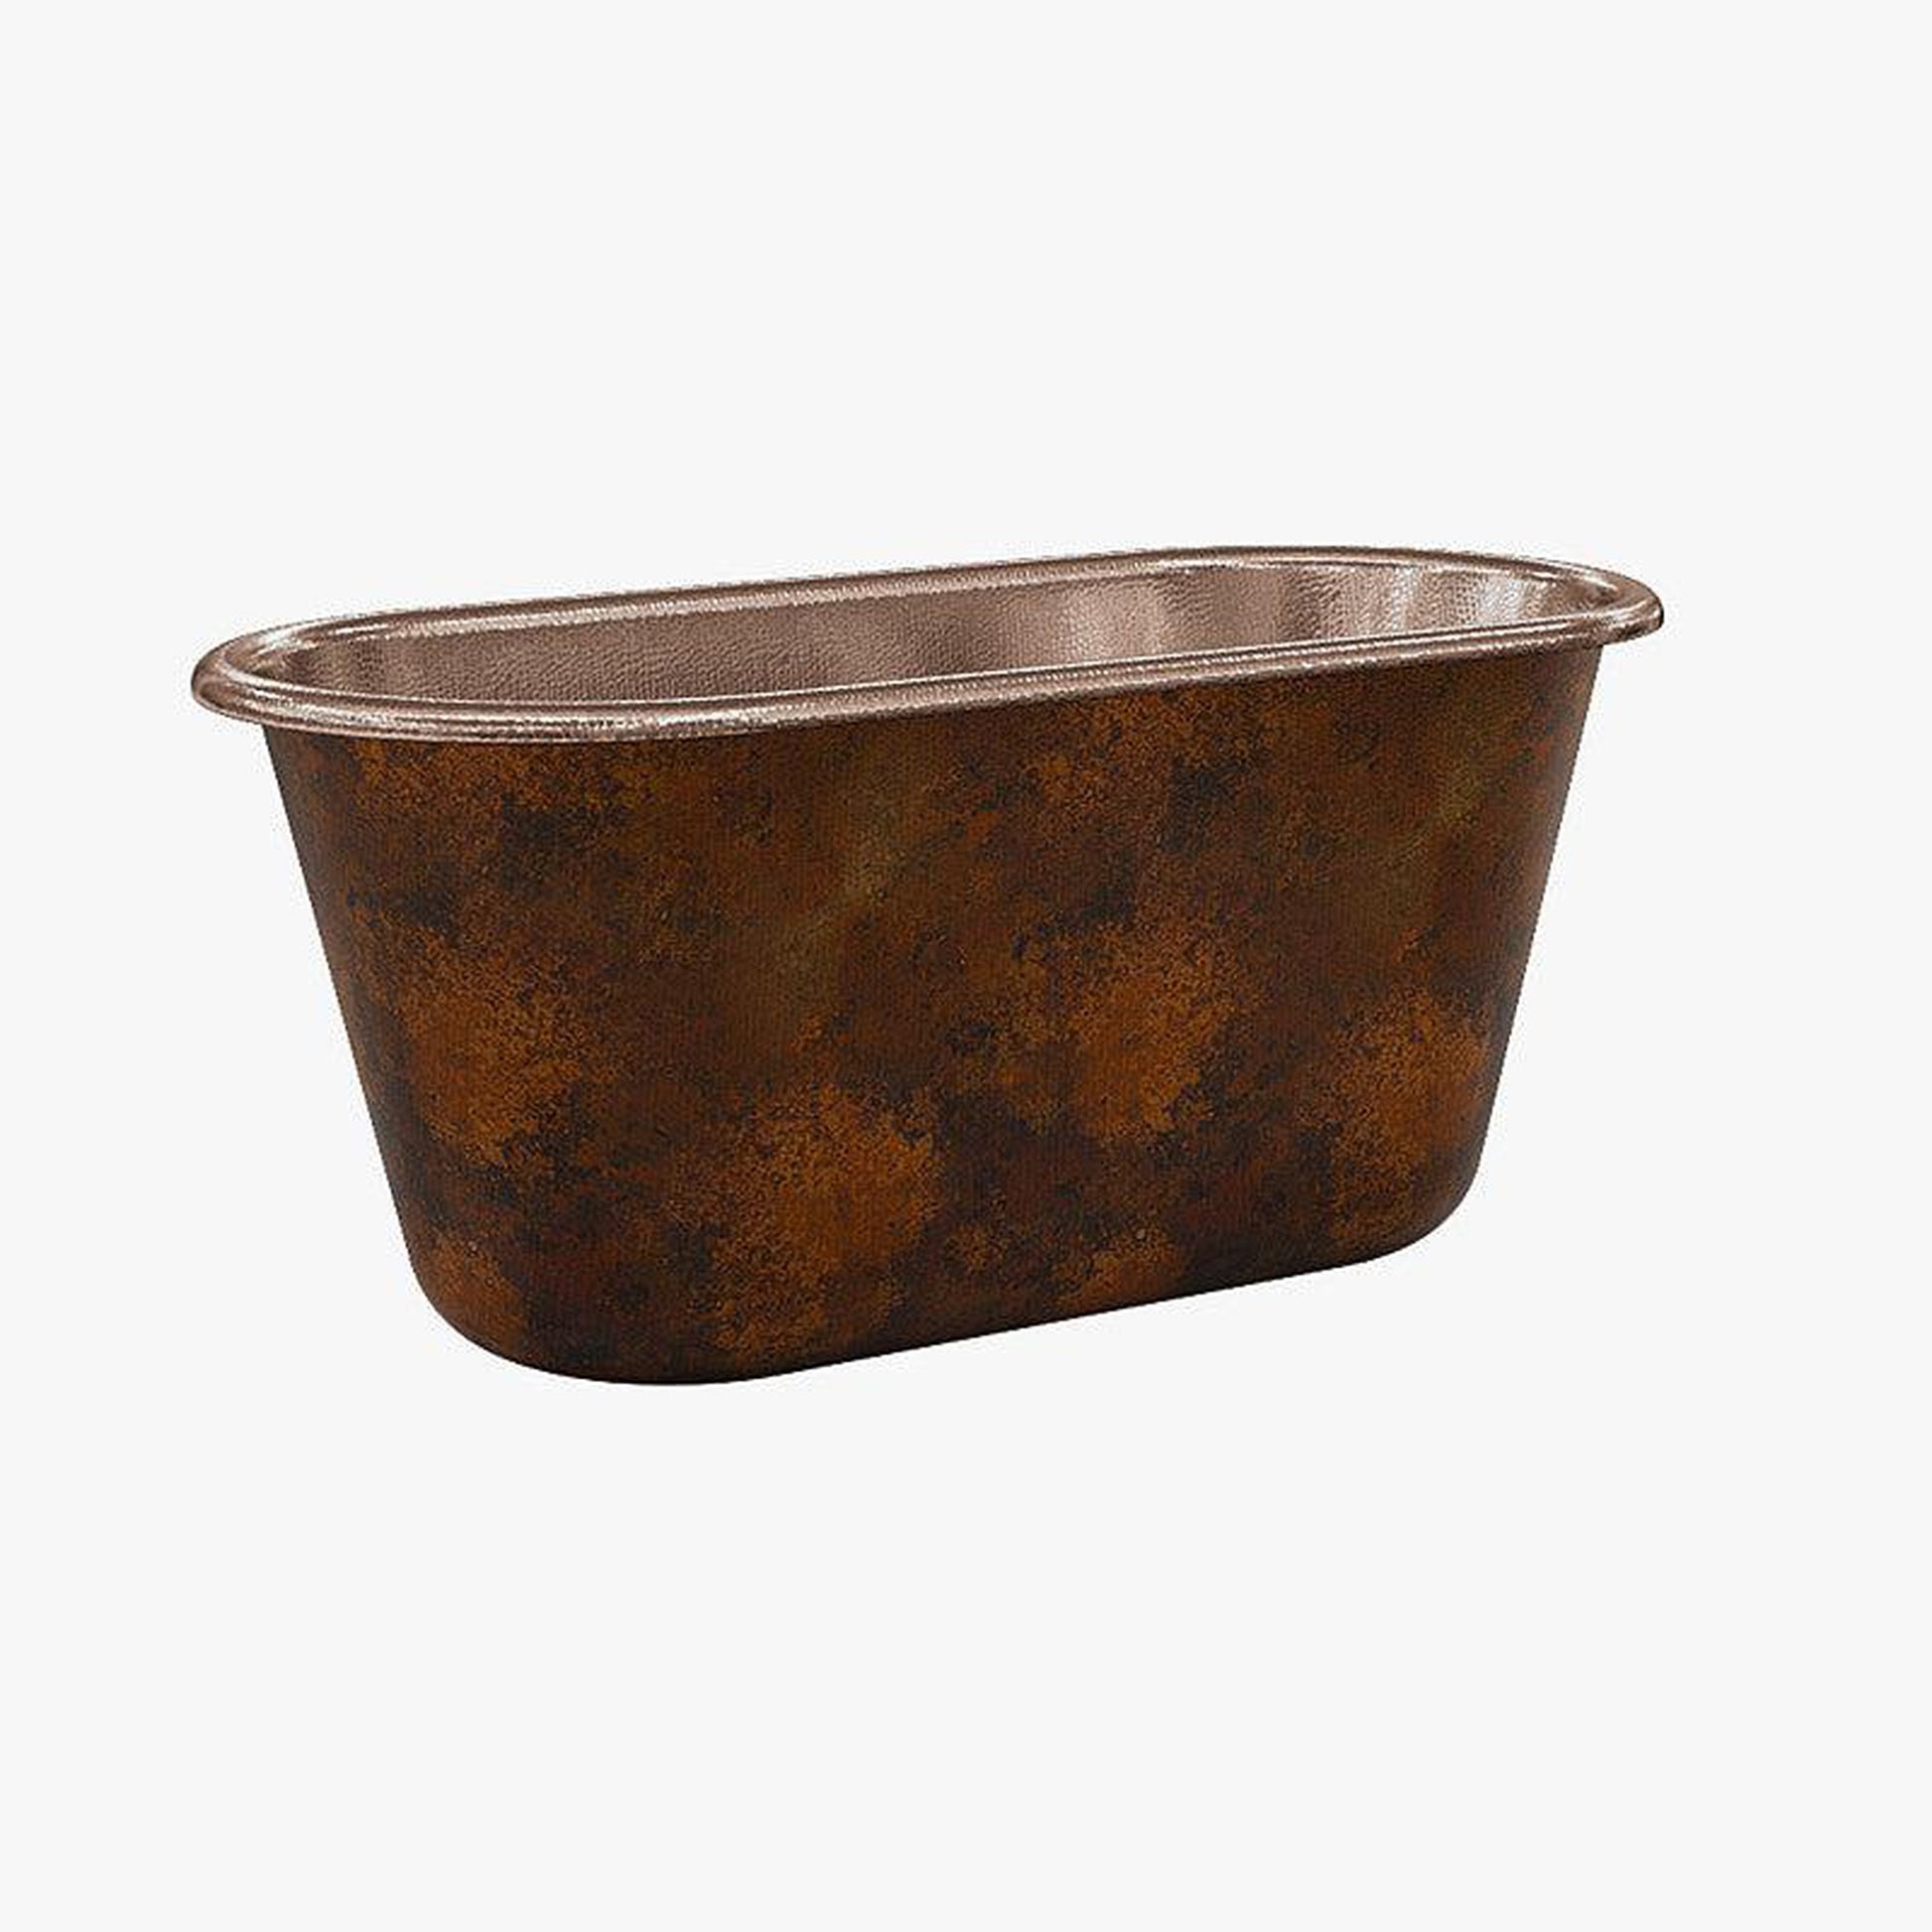 CopperSmith Heritage HX1 64" x 31" x 31" 14-Gauge Fire Copper Freestanding Bathtub With Polished Copper Interior and Oil Rubbed Bronze Push Button Tub Drain and Brushed Nickel Tub Filler